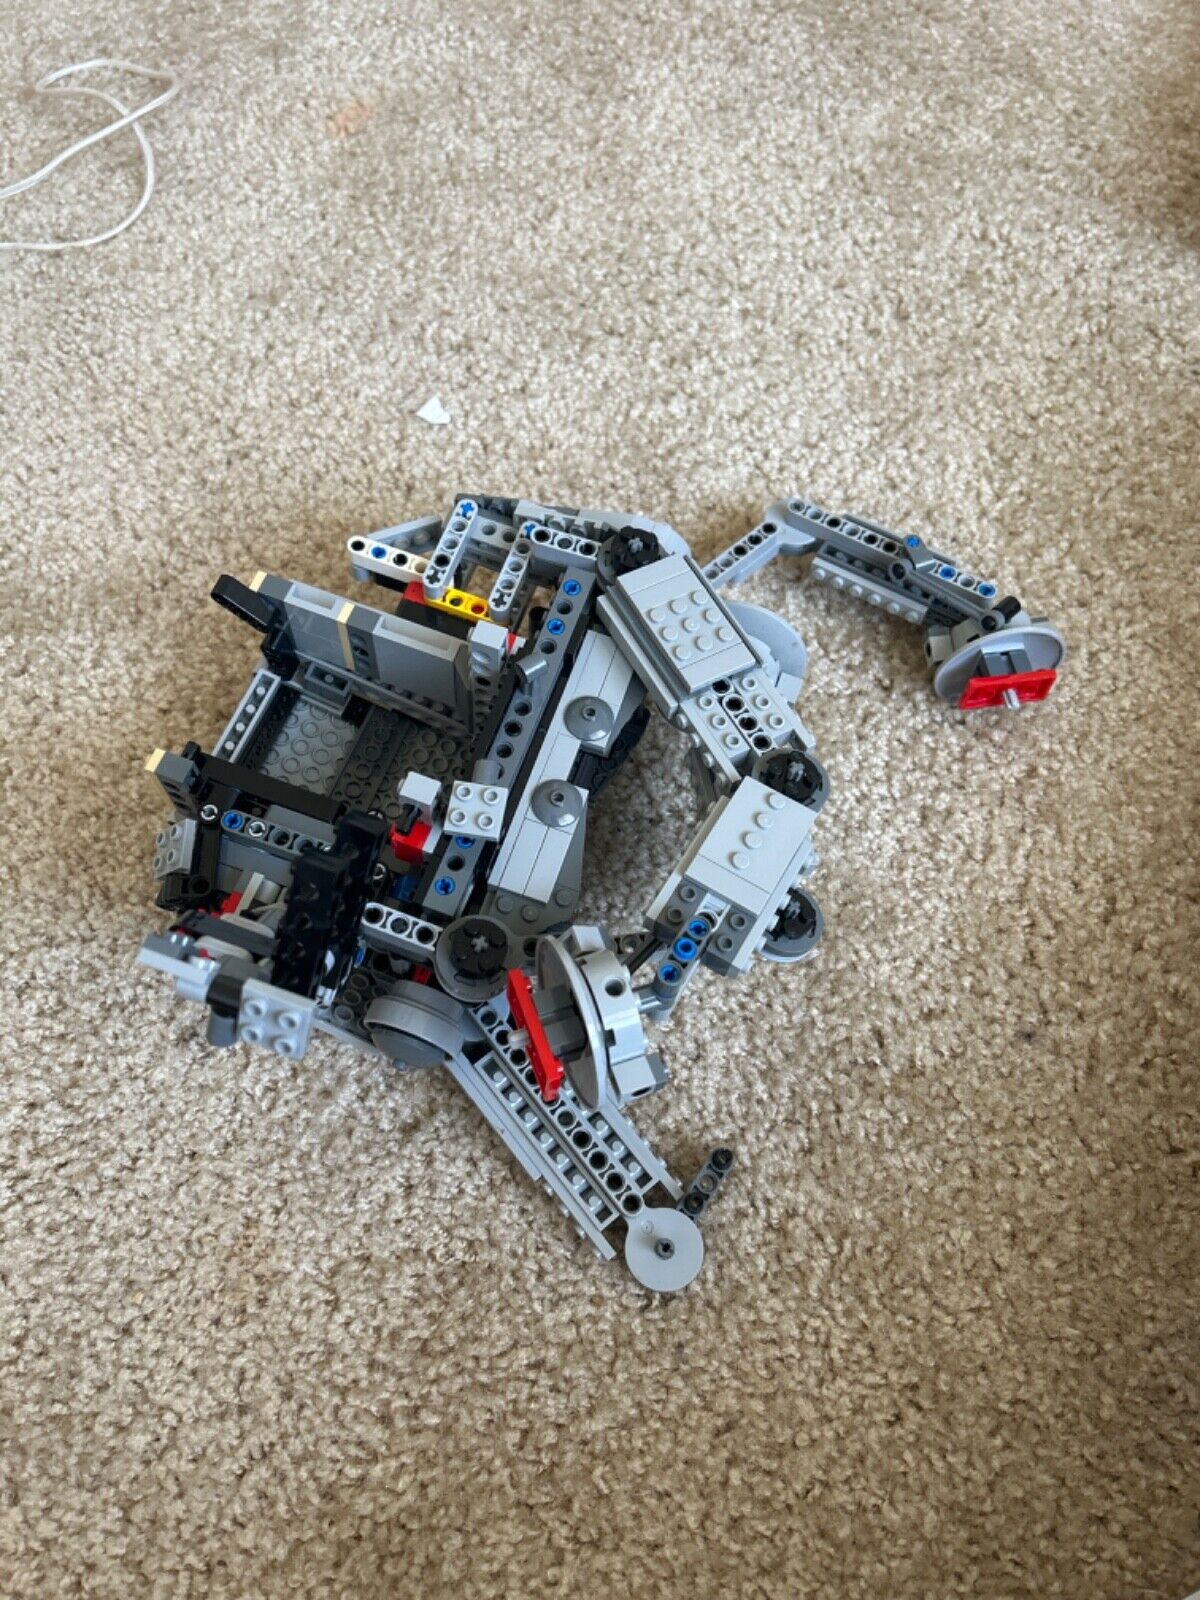 LEGO Star Wars AT-AT (75054) UNSURE IF IT IS FULL SET